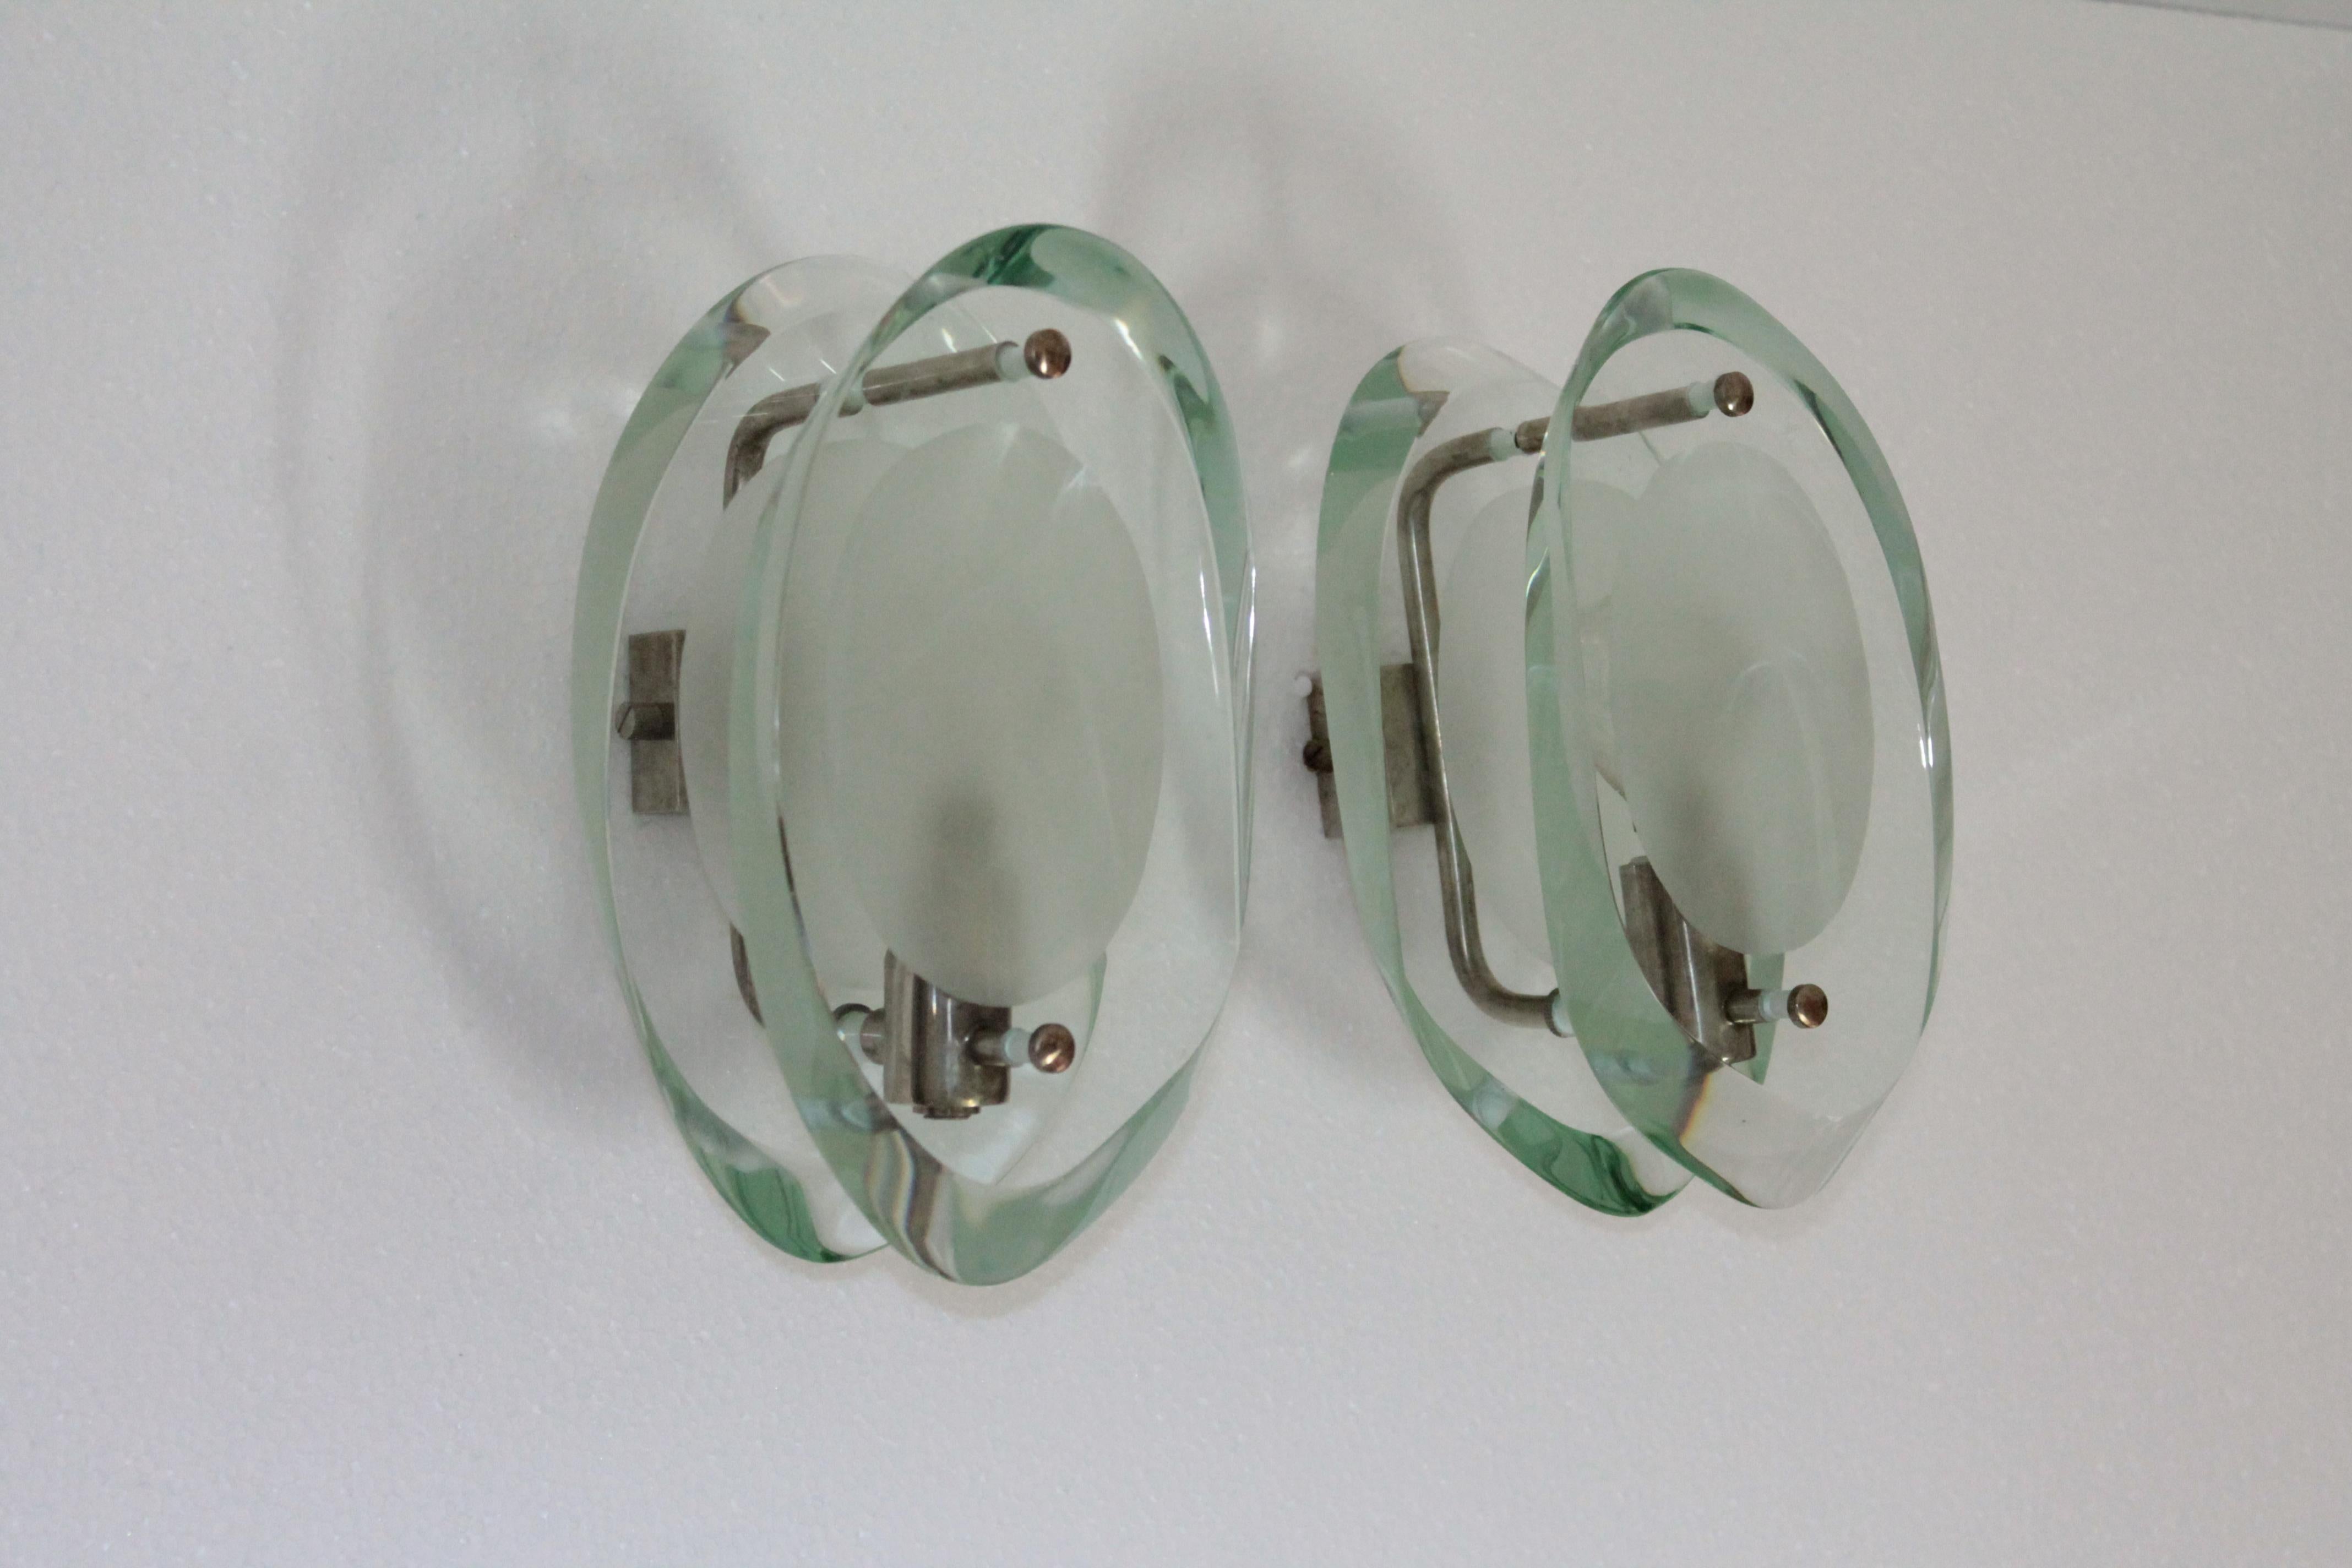 Pair of sconces designed by Max Ingrand and produced by Fontana Arte during the 1960s.